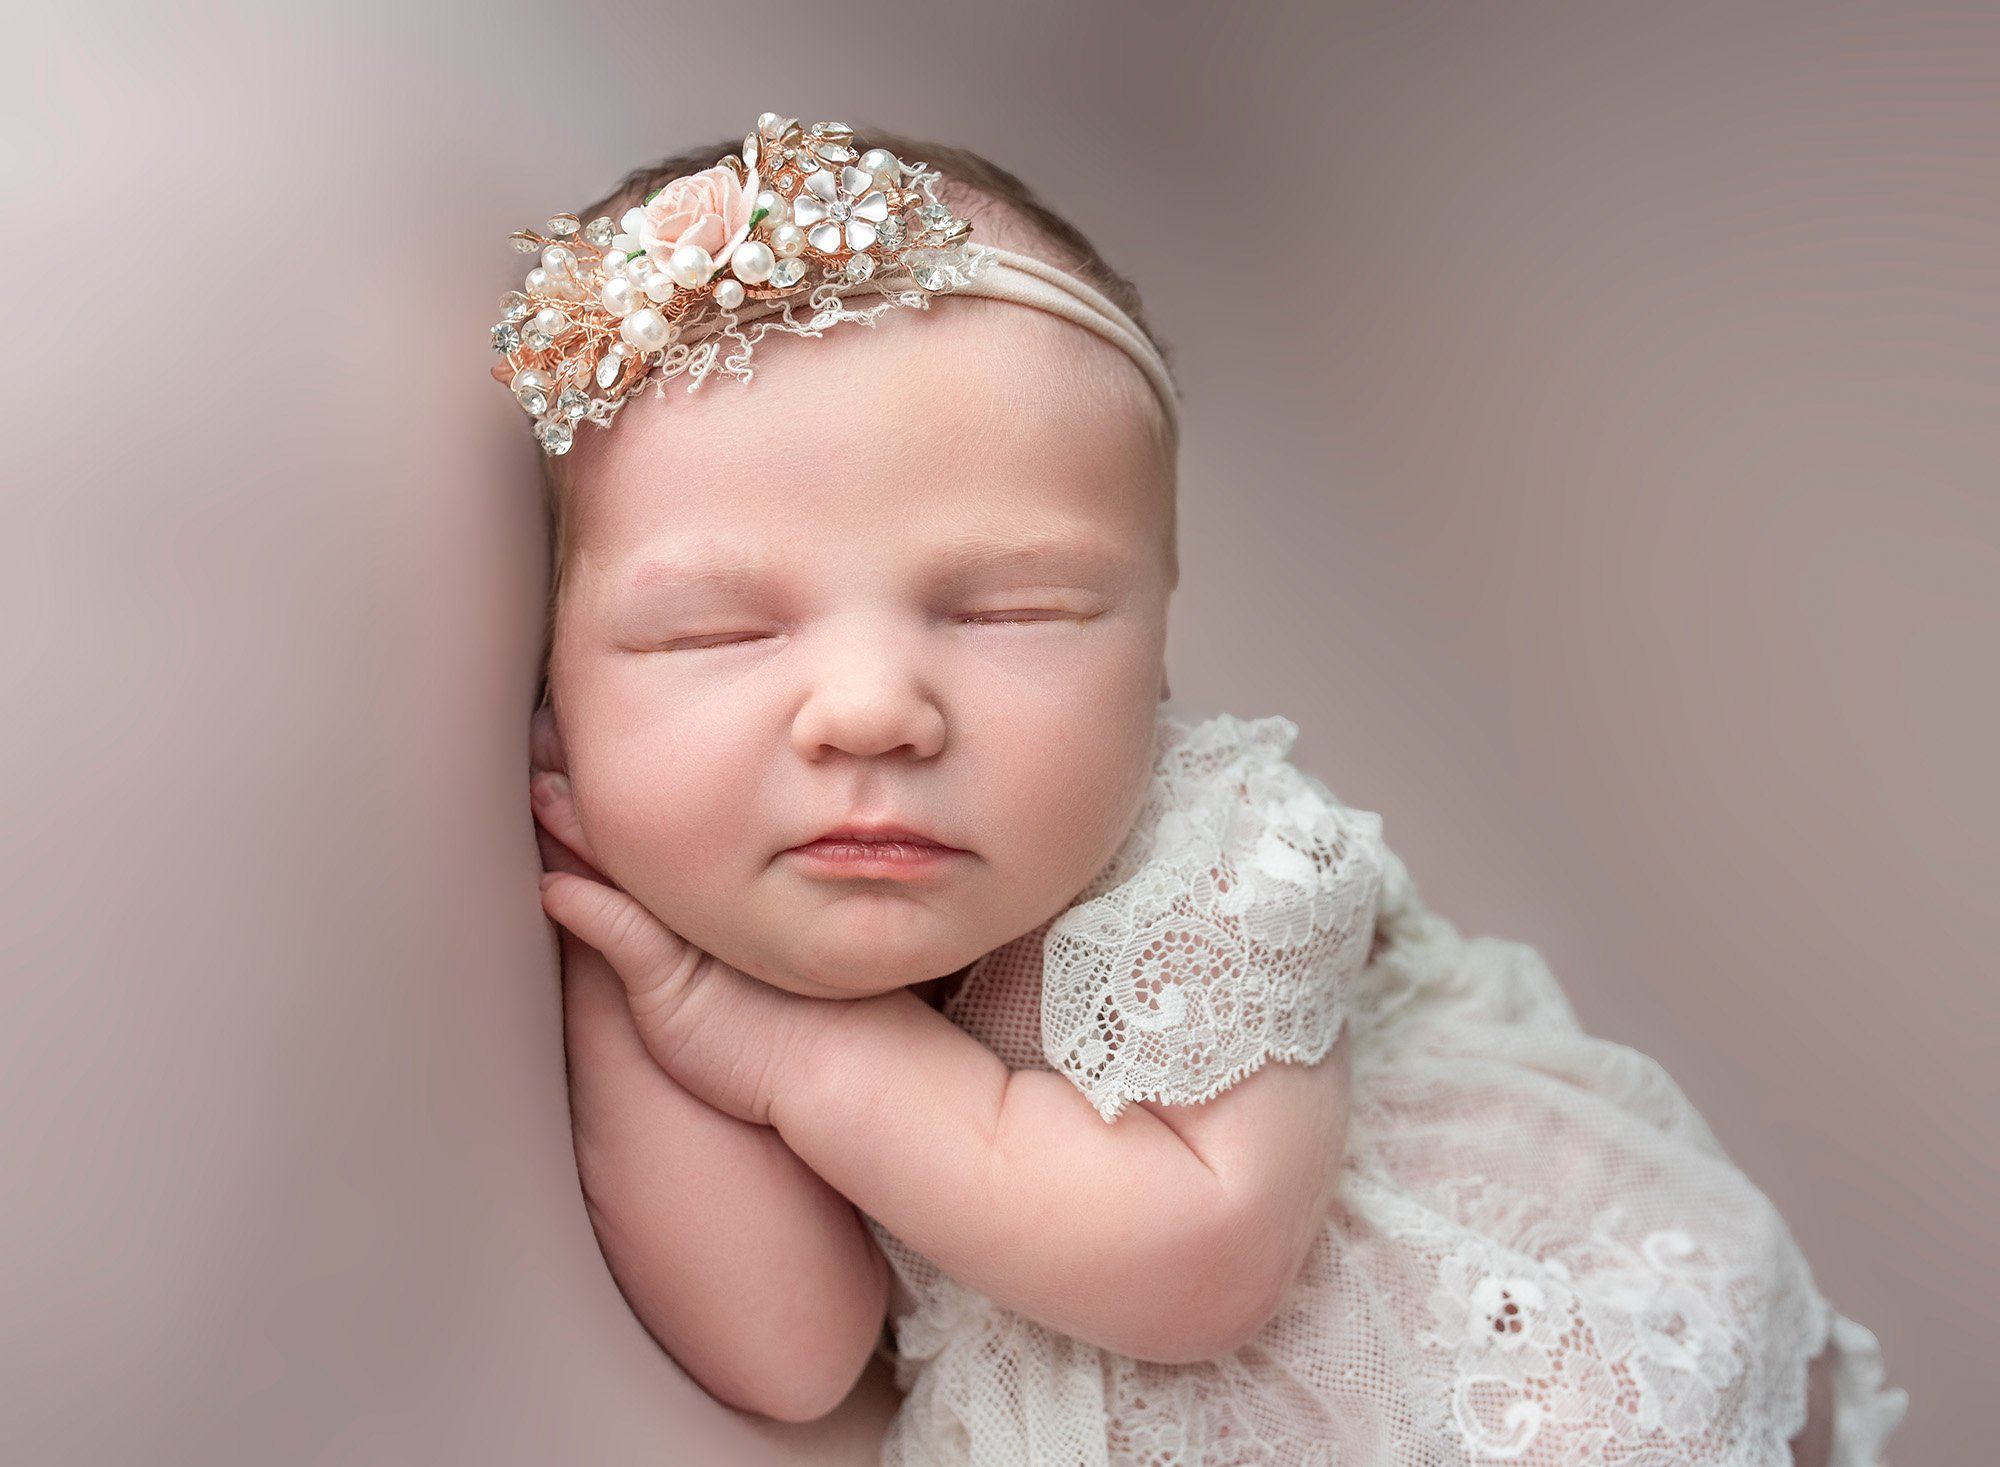 stunning newborn baby girl asleep on her hands wearing a white laced dress